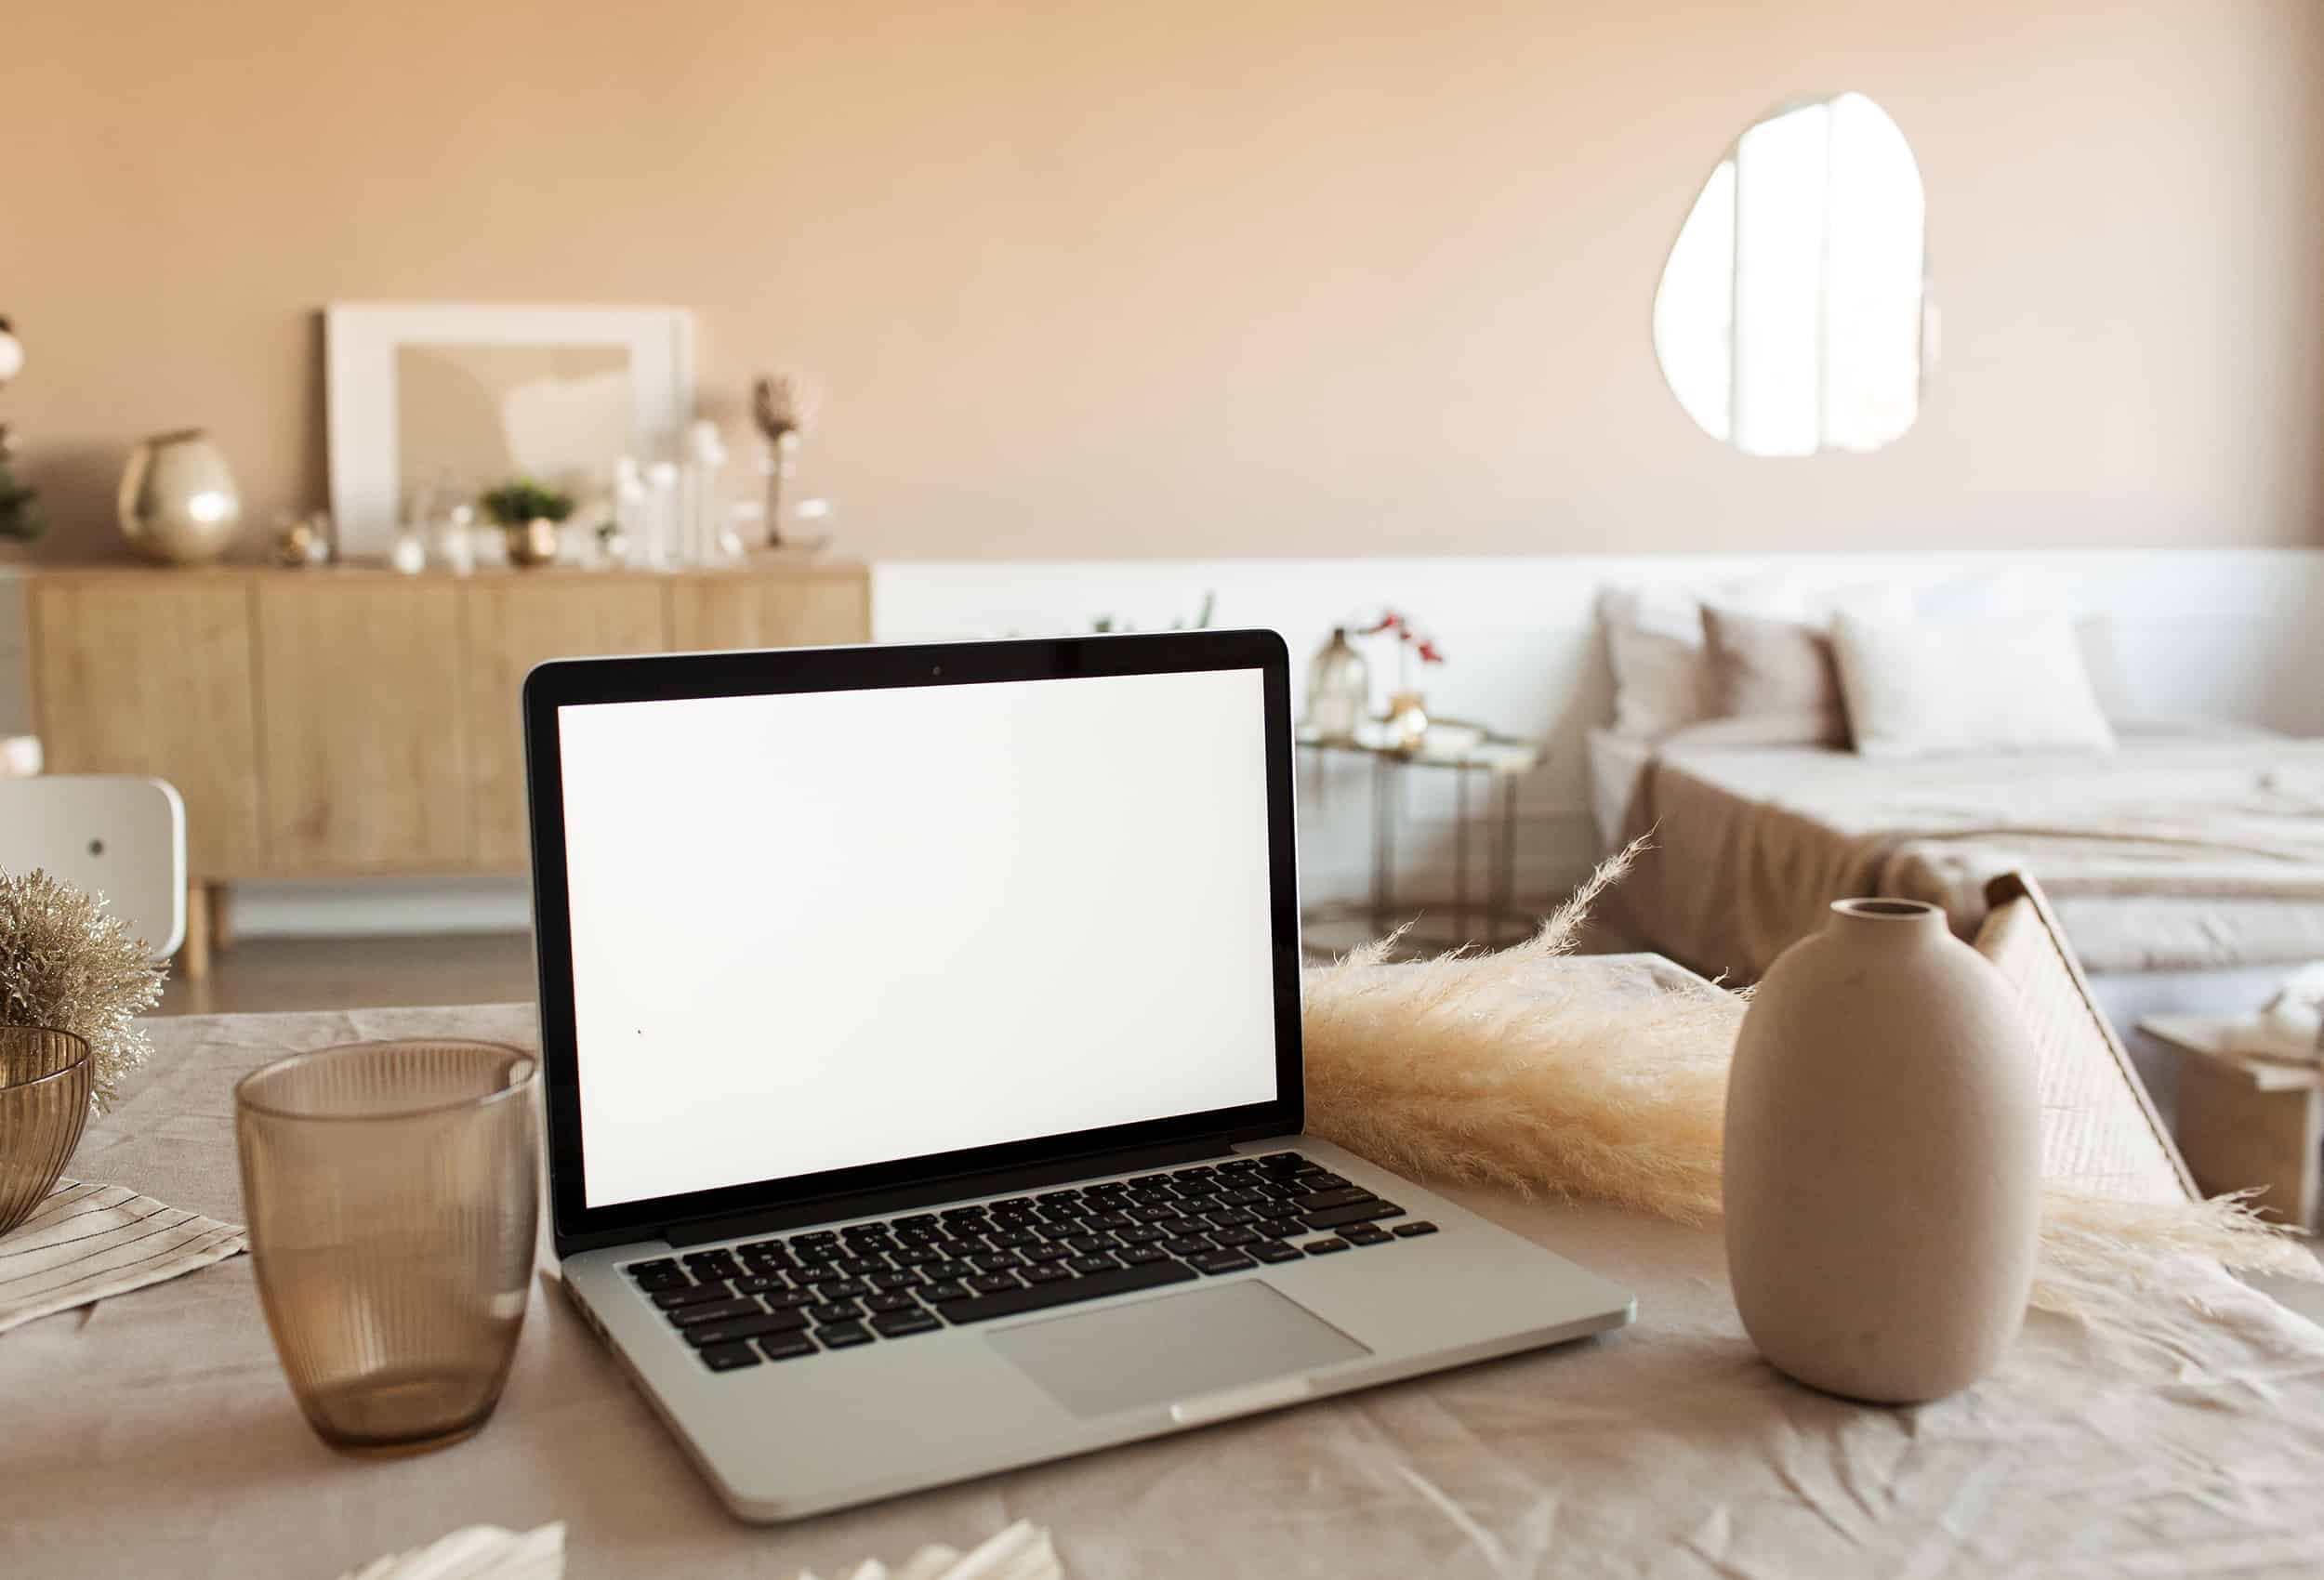 Blank-display-screen-laptop-on-table-with-beautiful-decorations